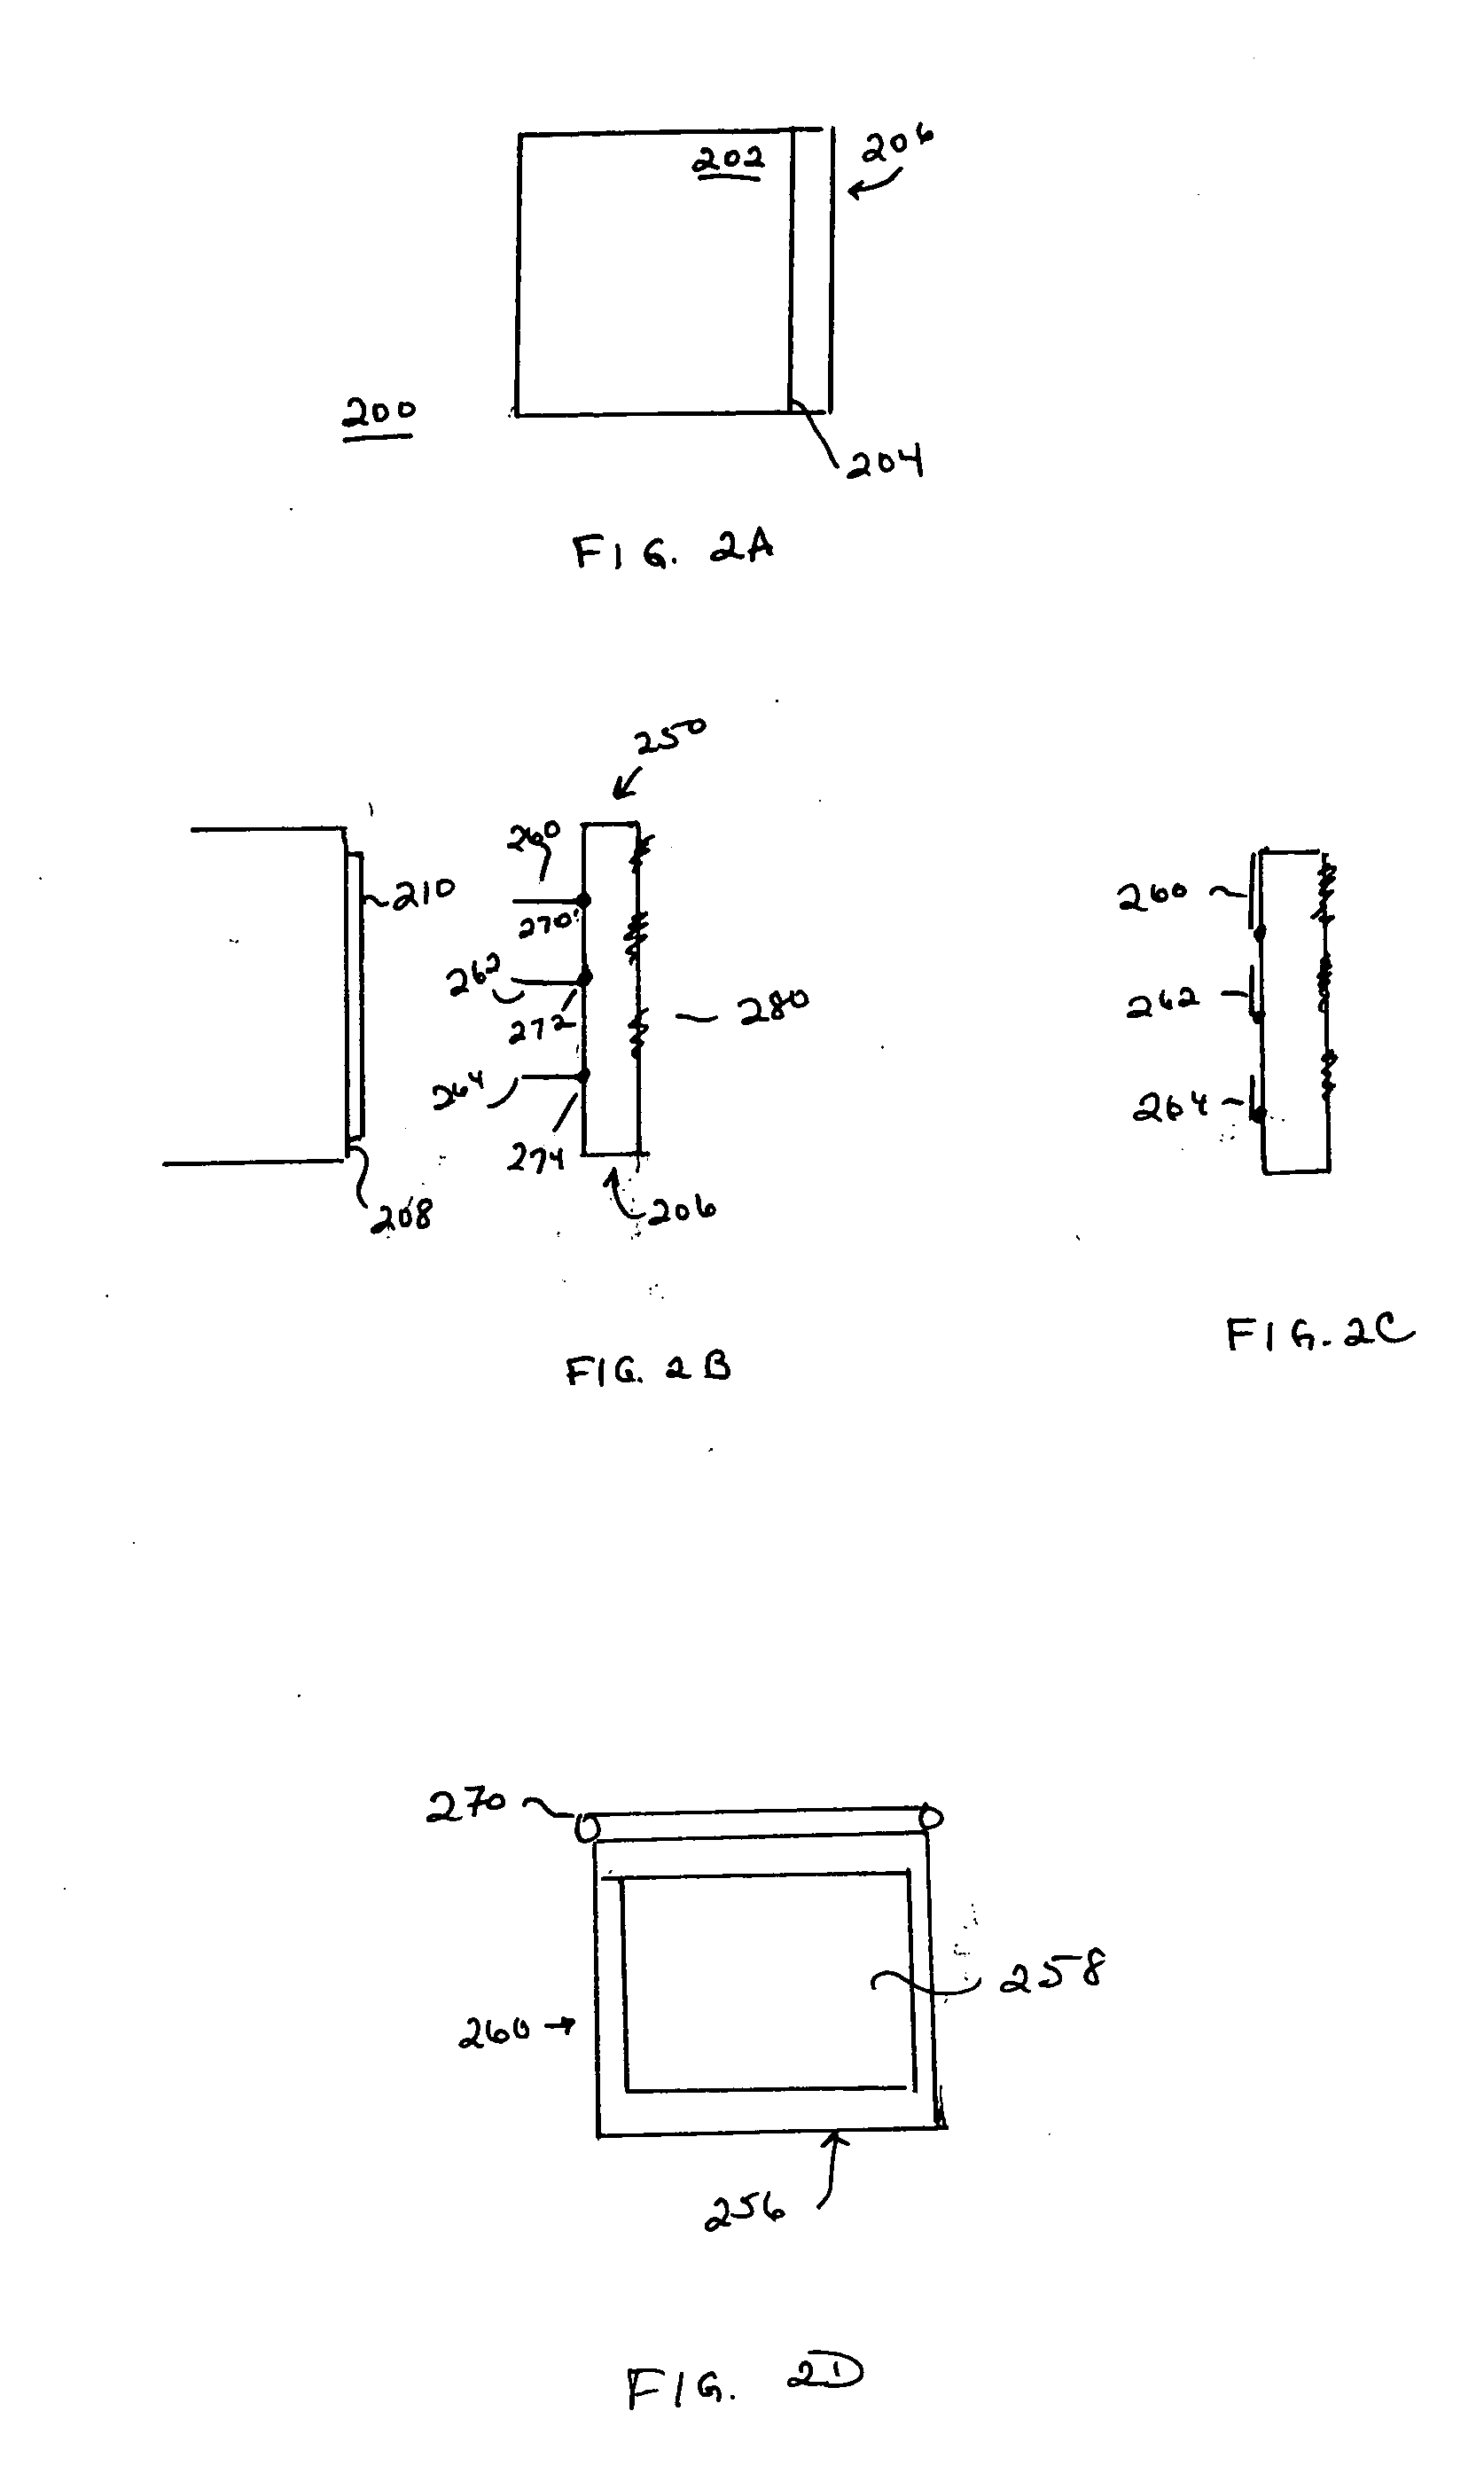 Cathode fluid controlling assembly for use in a direct oxidation fuel cell system